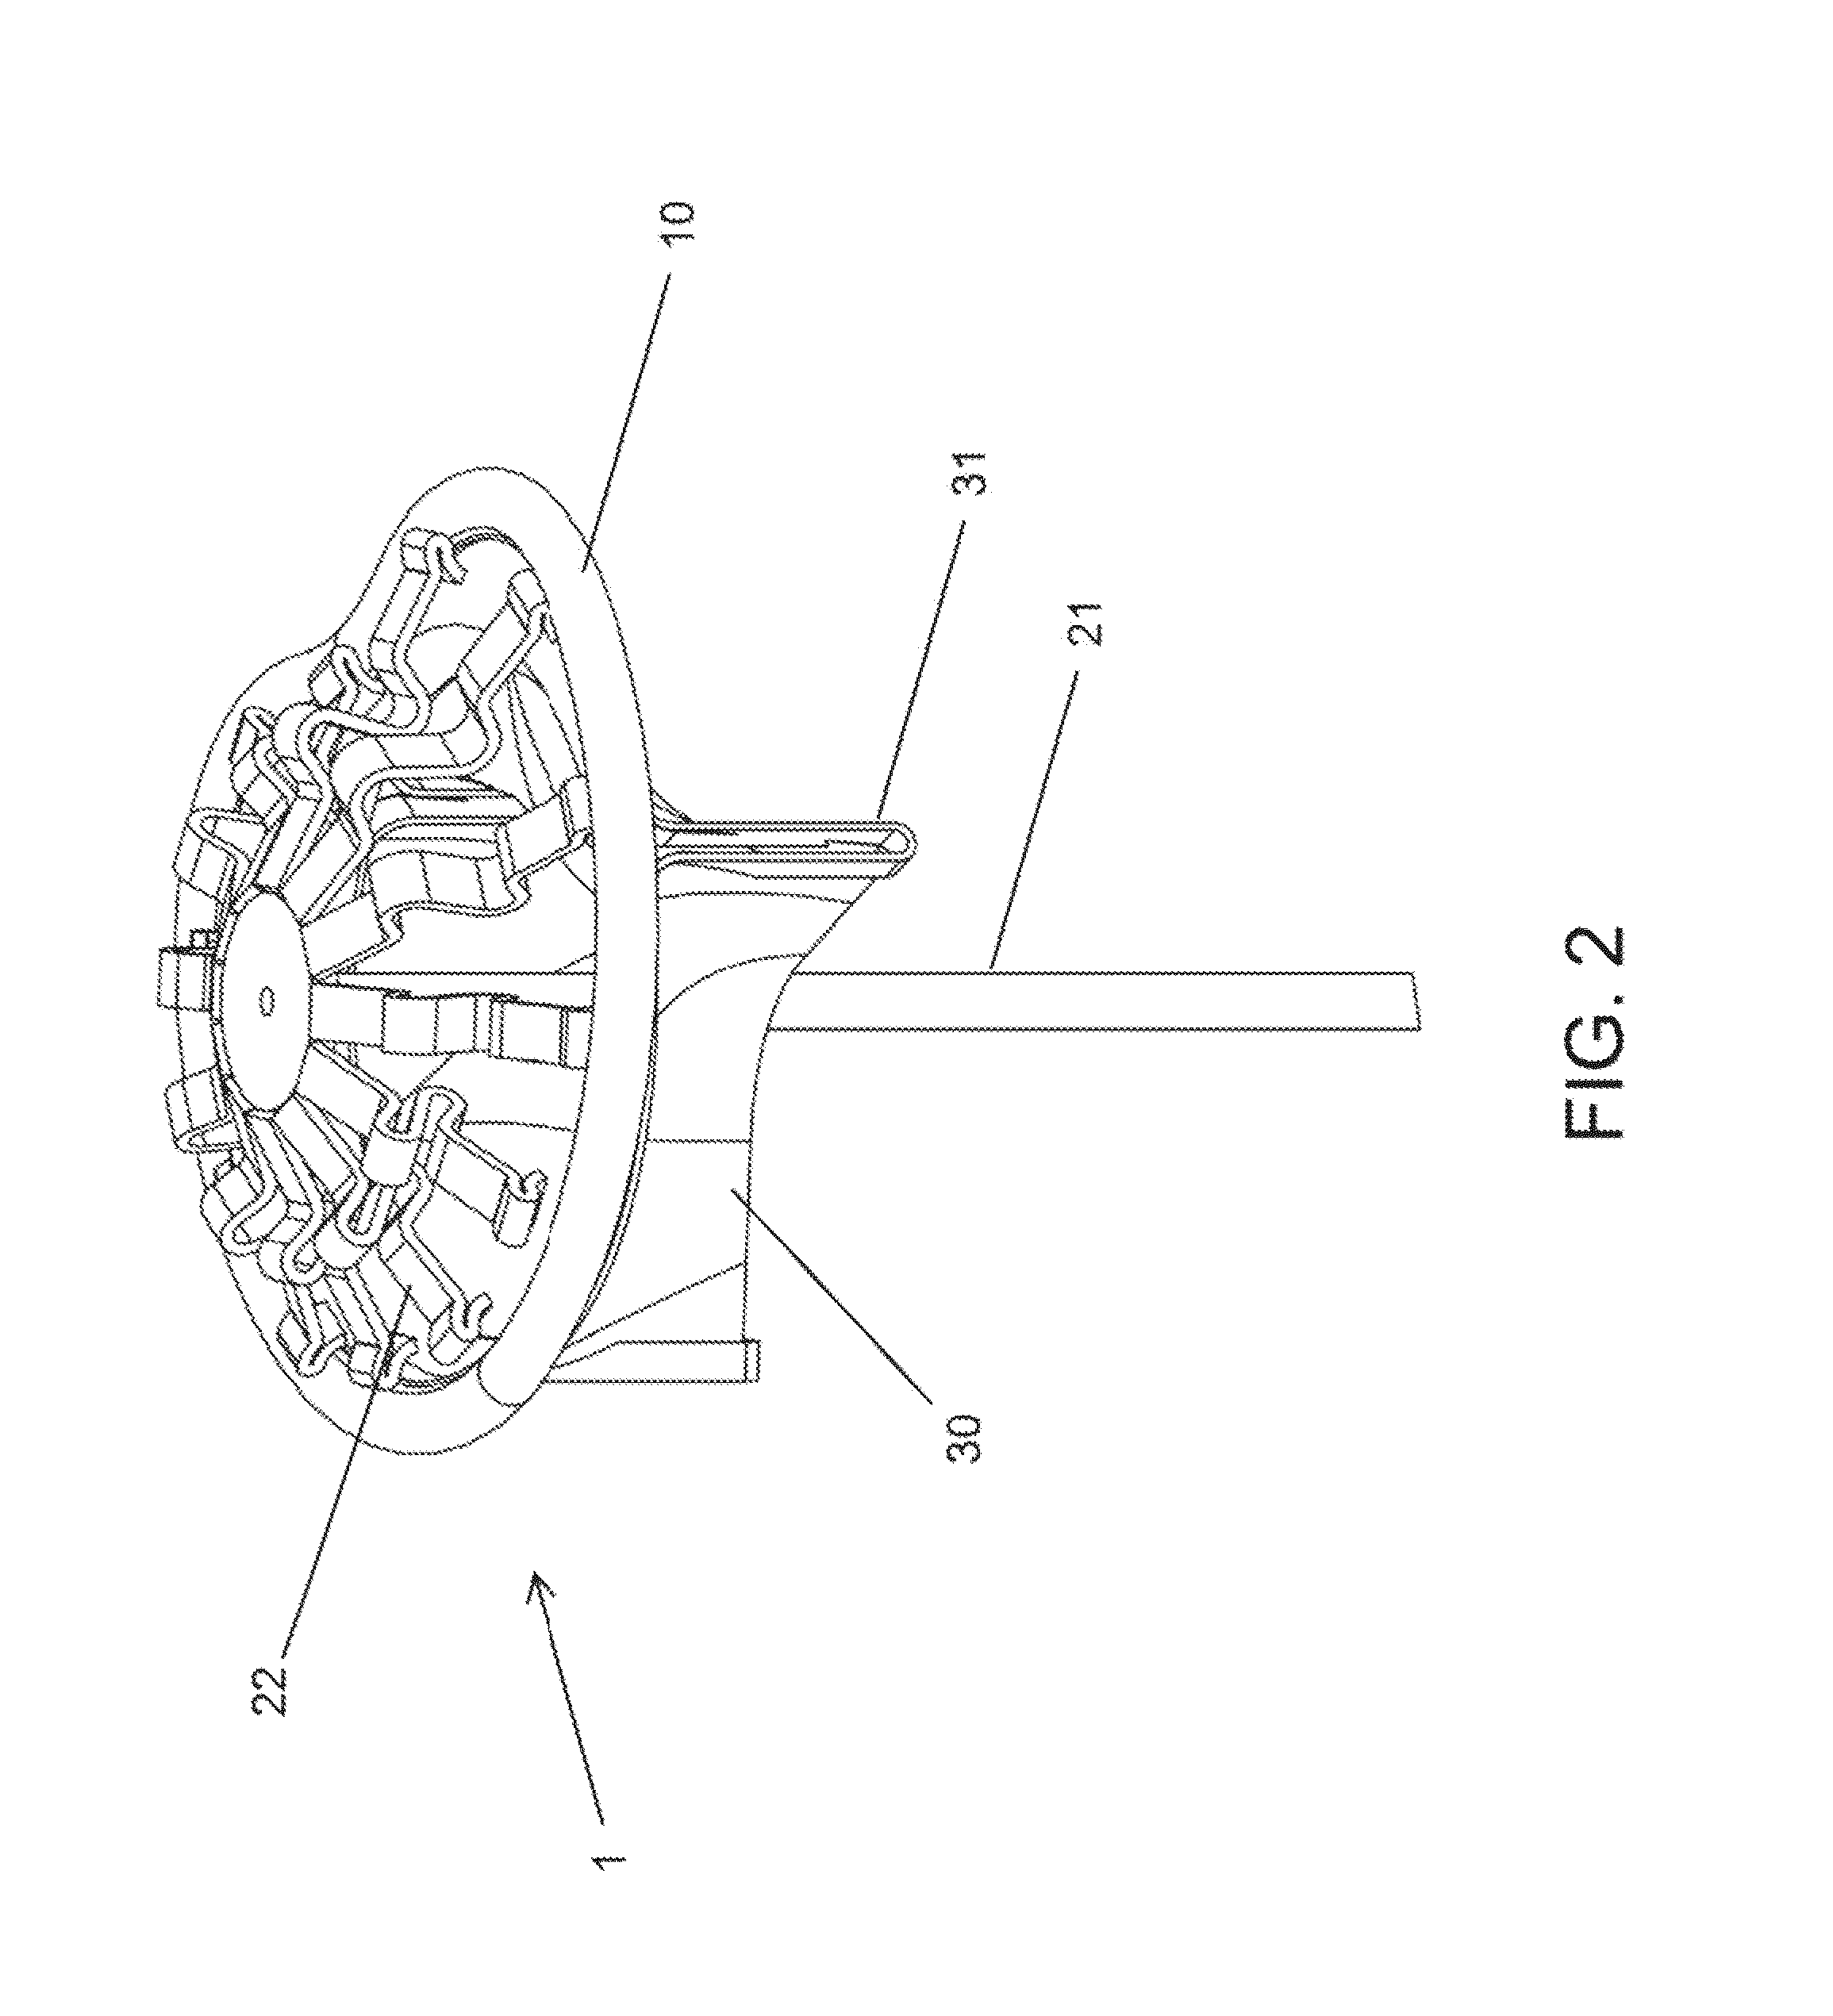 Systems and Methods for Affixing A Prosthetic to Tissue